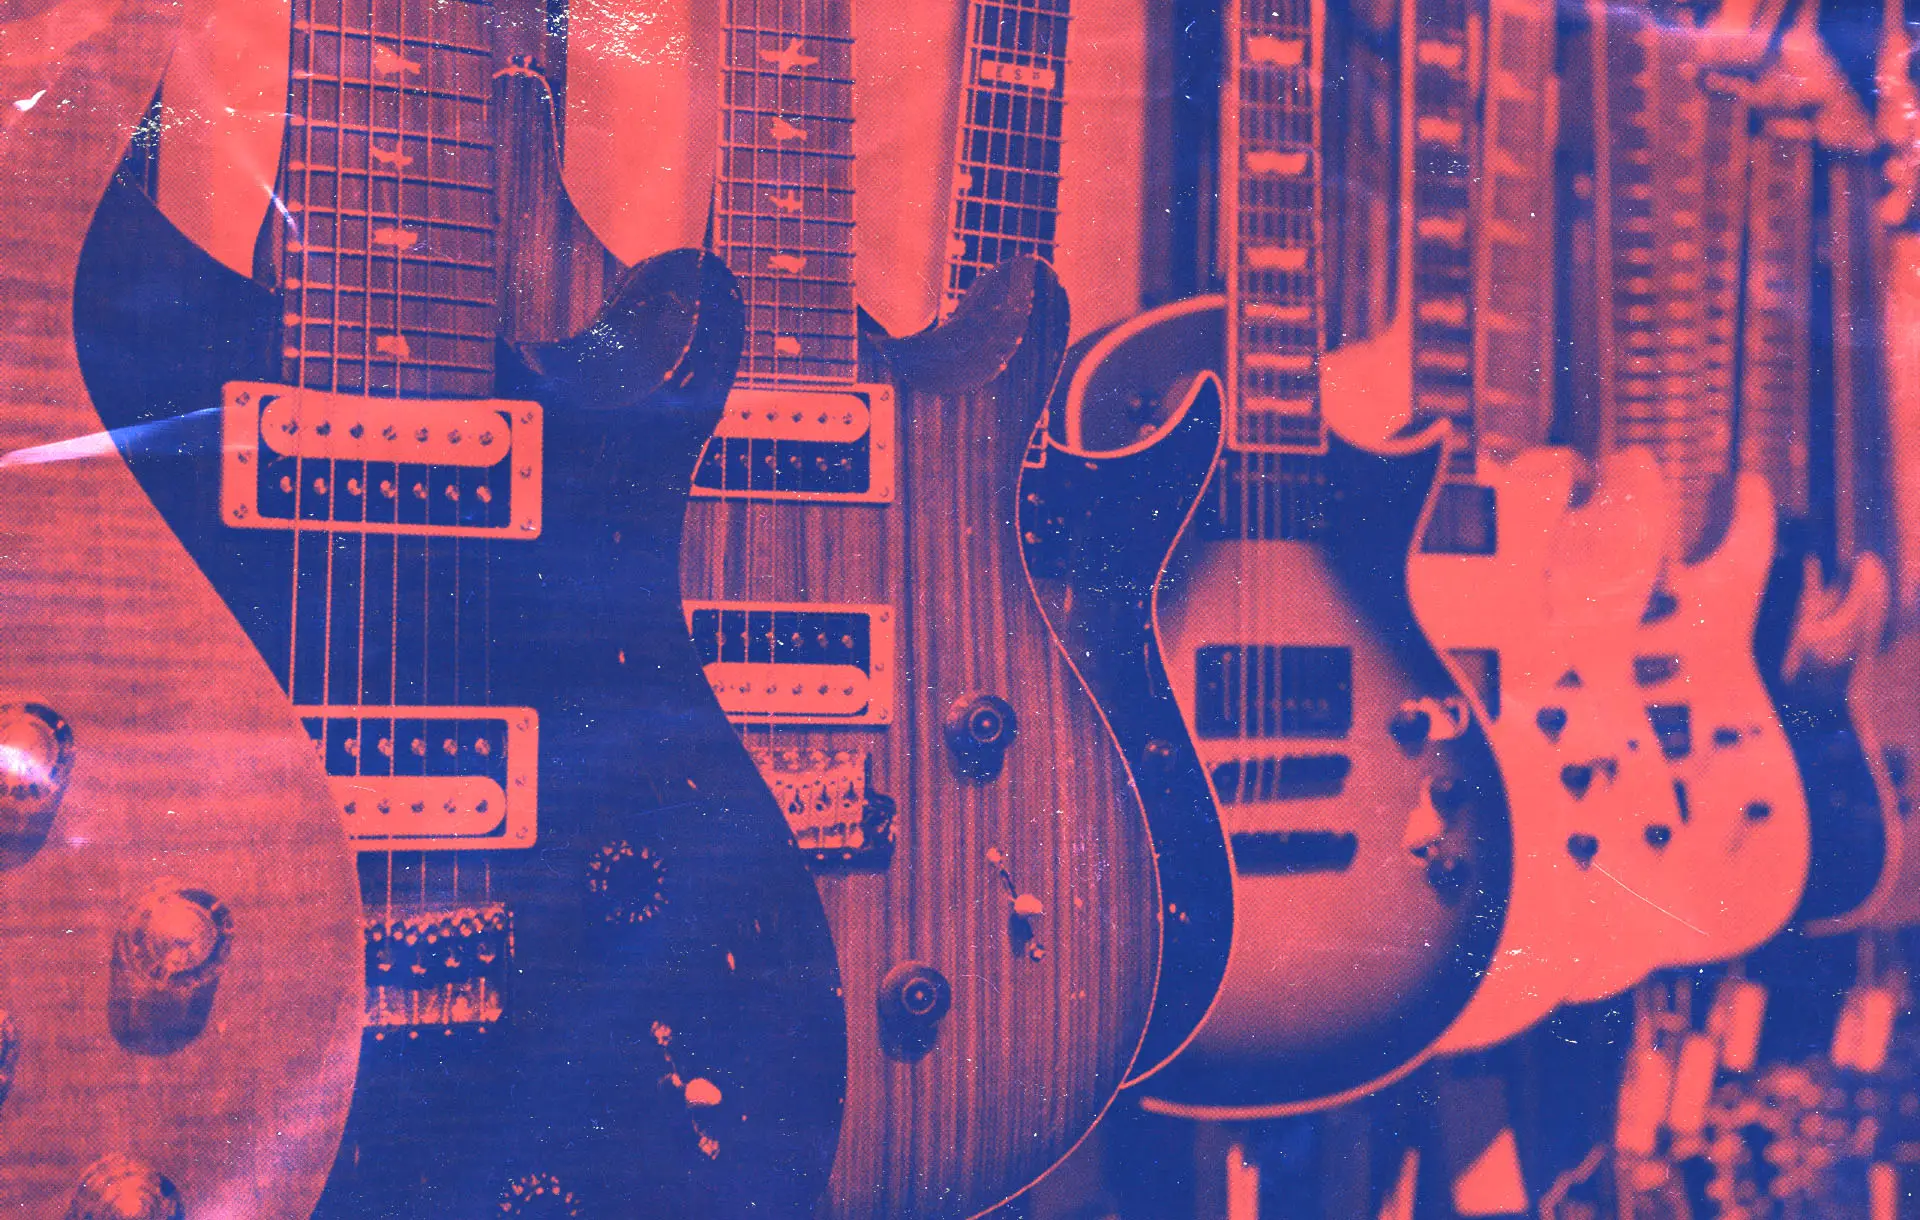 8 Tips on How to Spot Fake or Counterfeit Electric Guitars | Other | LIVING LIFE FEARLESS